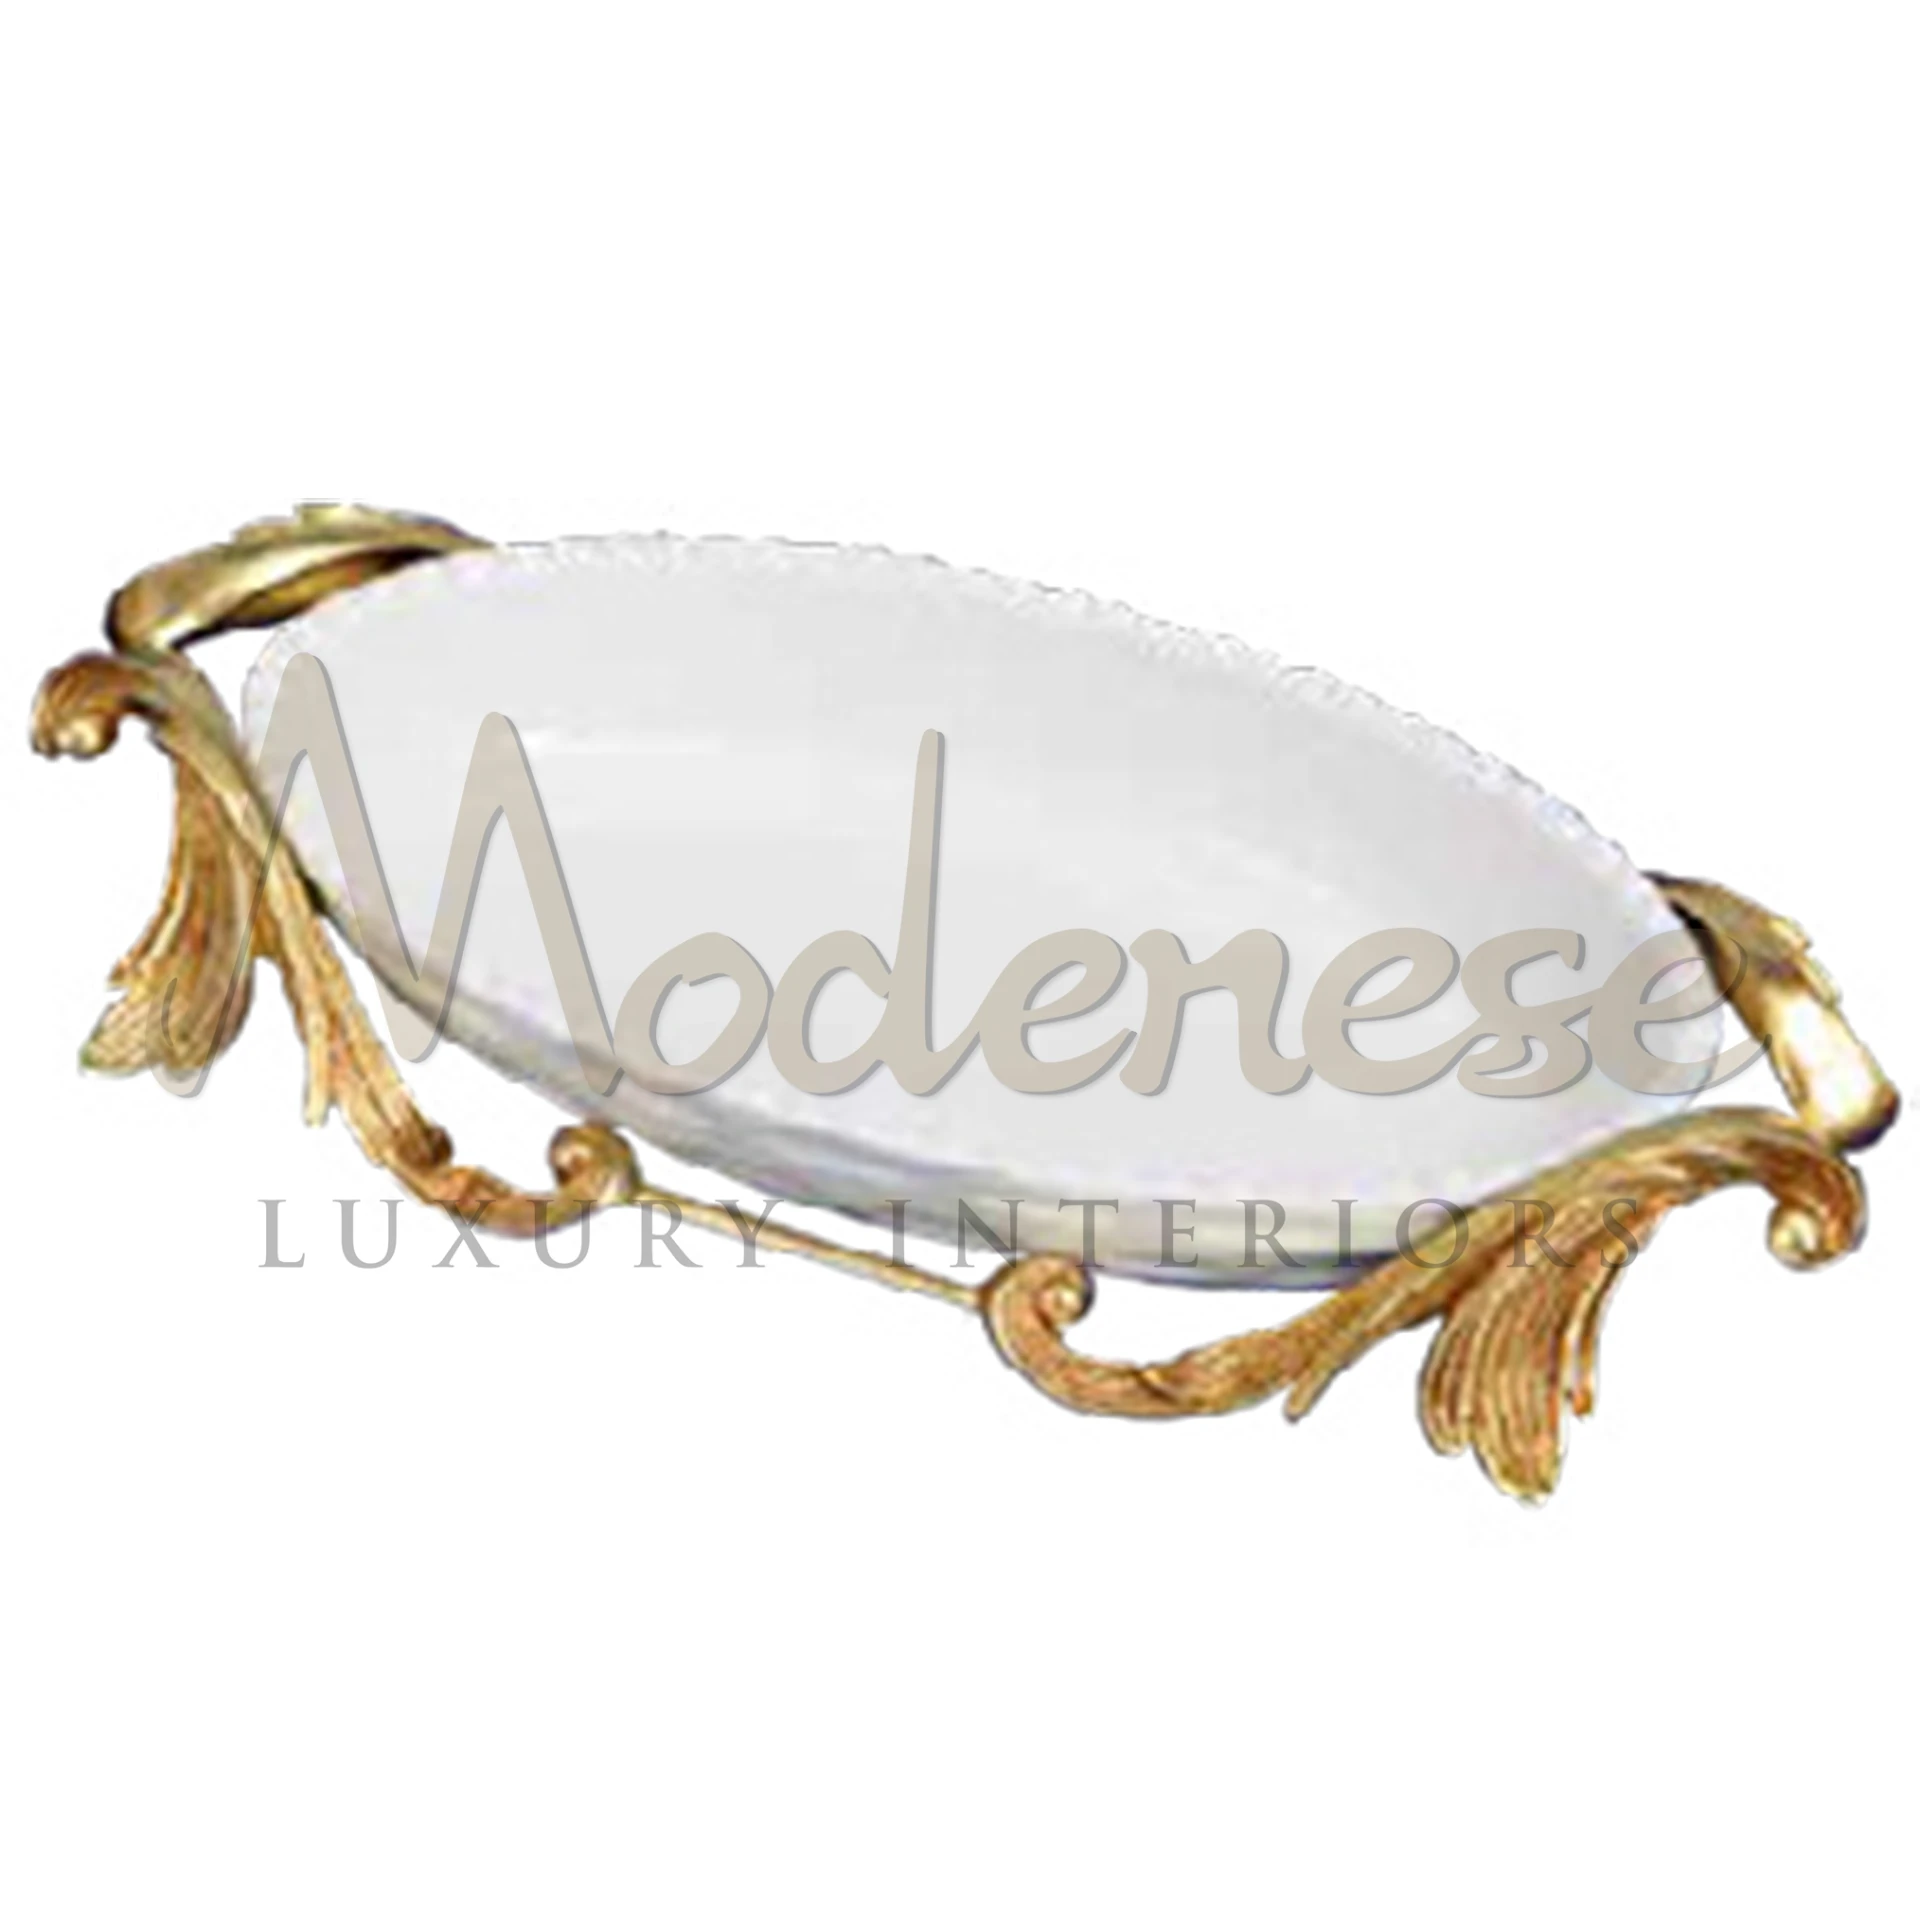 White oval plate with gold design decor